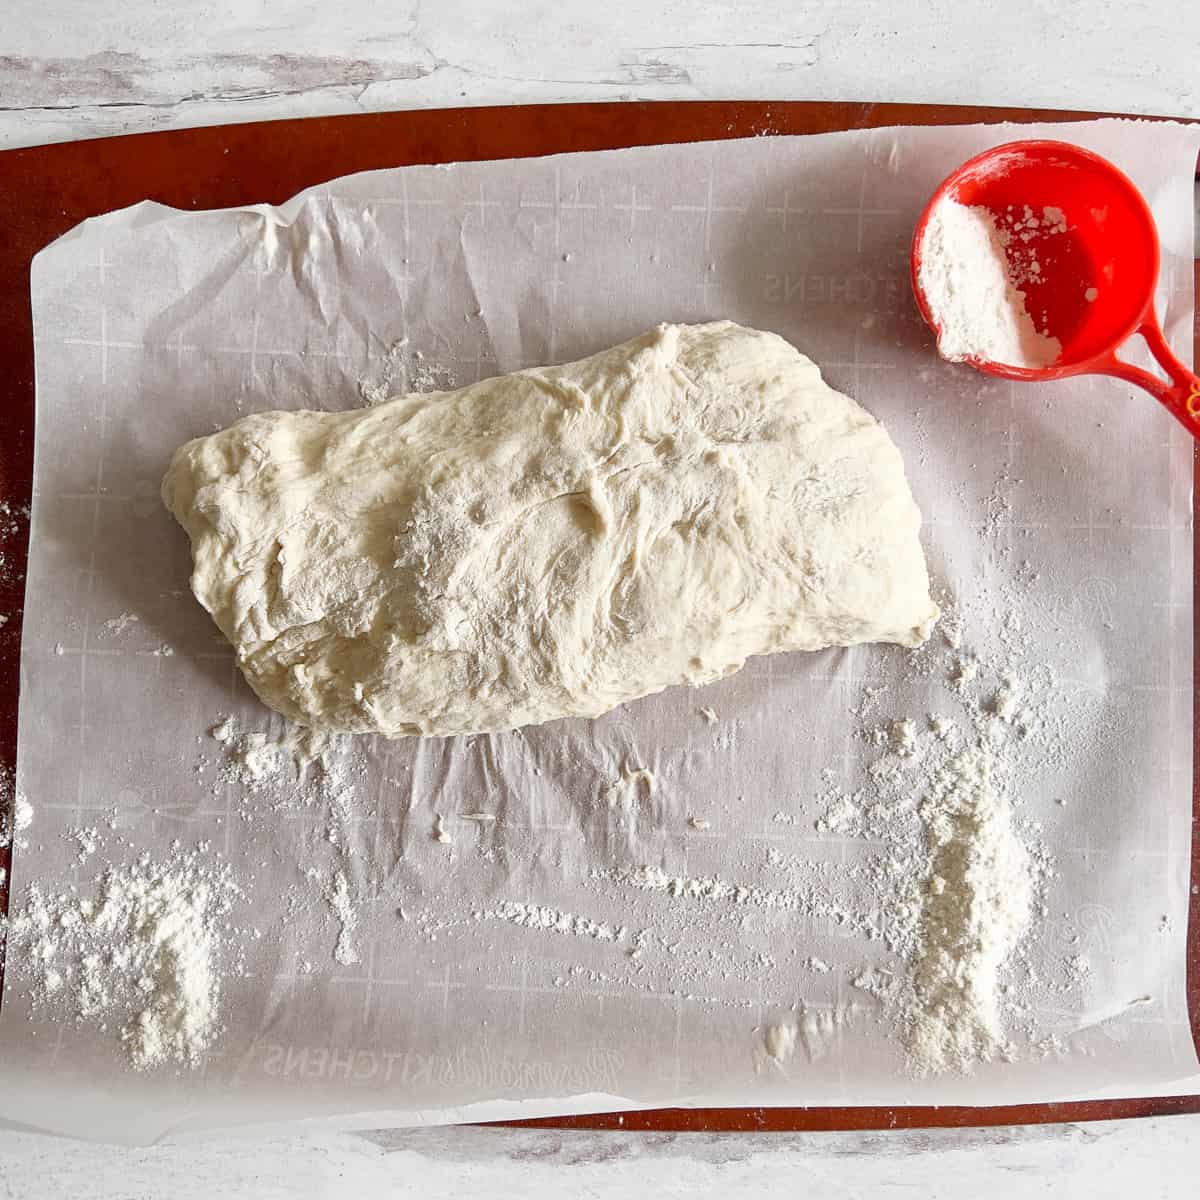 Ciabatta dough stretched out in a rectangle on parchment lines cutting board with orange measuring cup partially filled with flour.